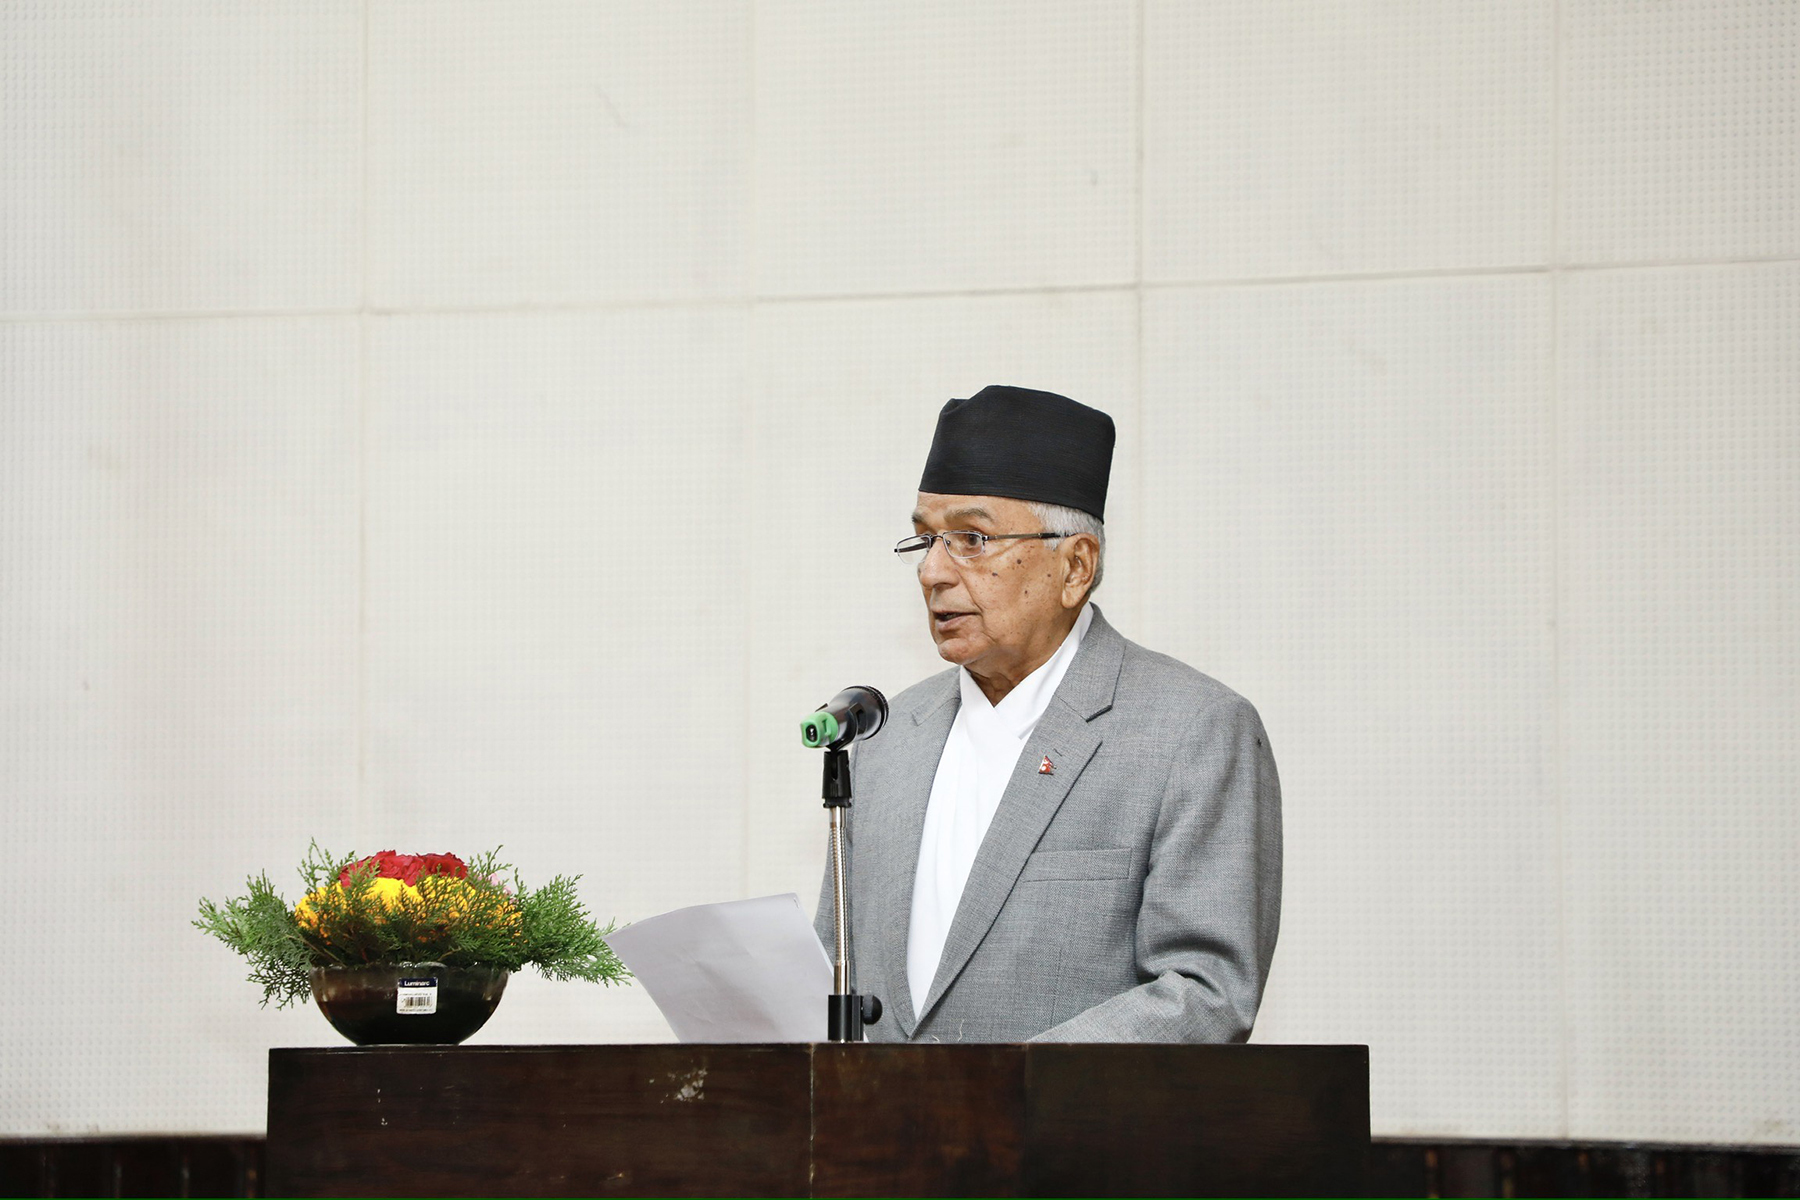 Only a free press consolidates democracy: President Paudel